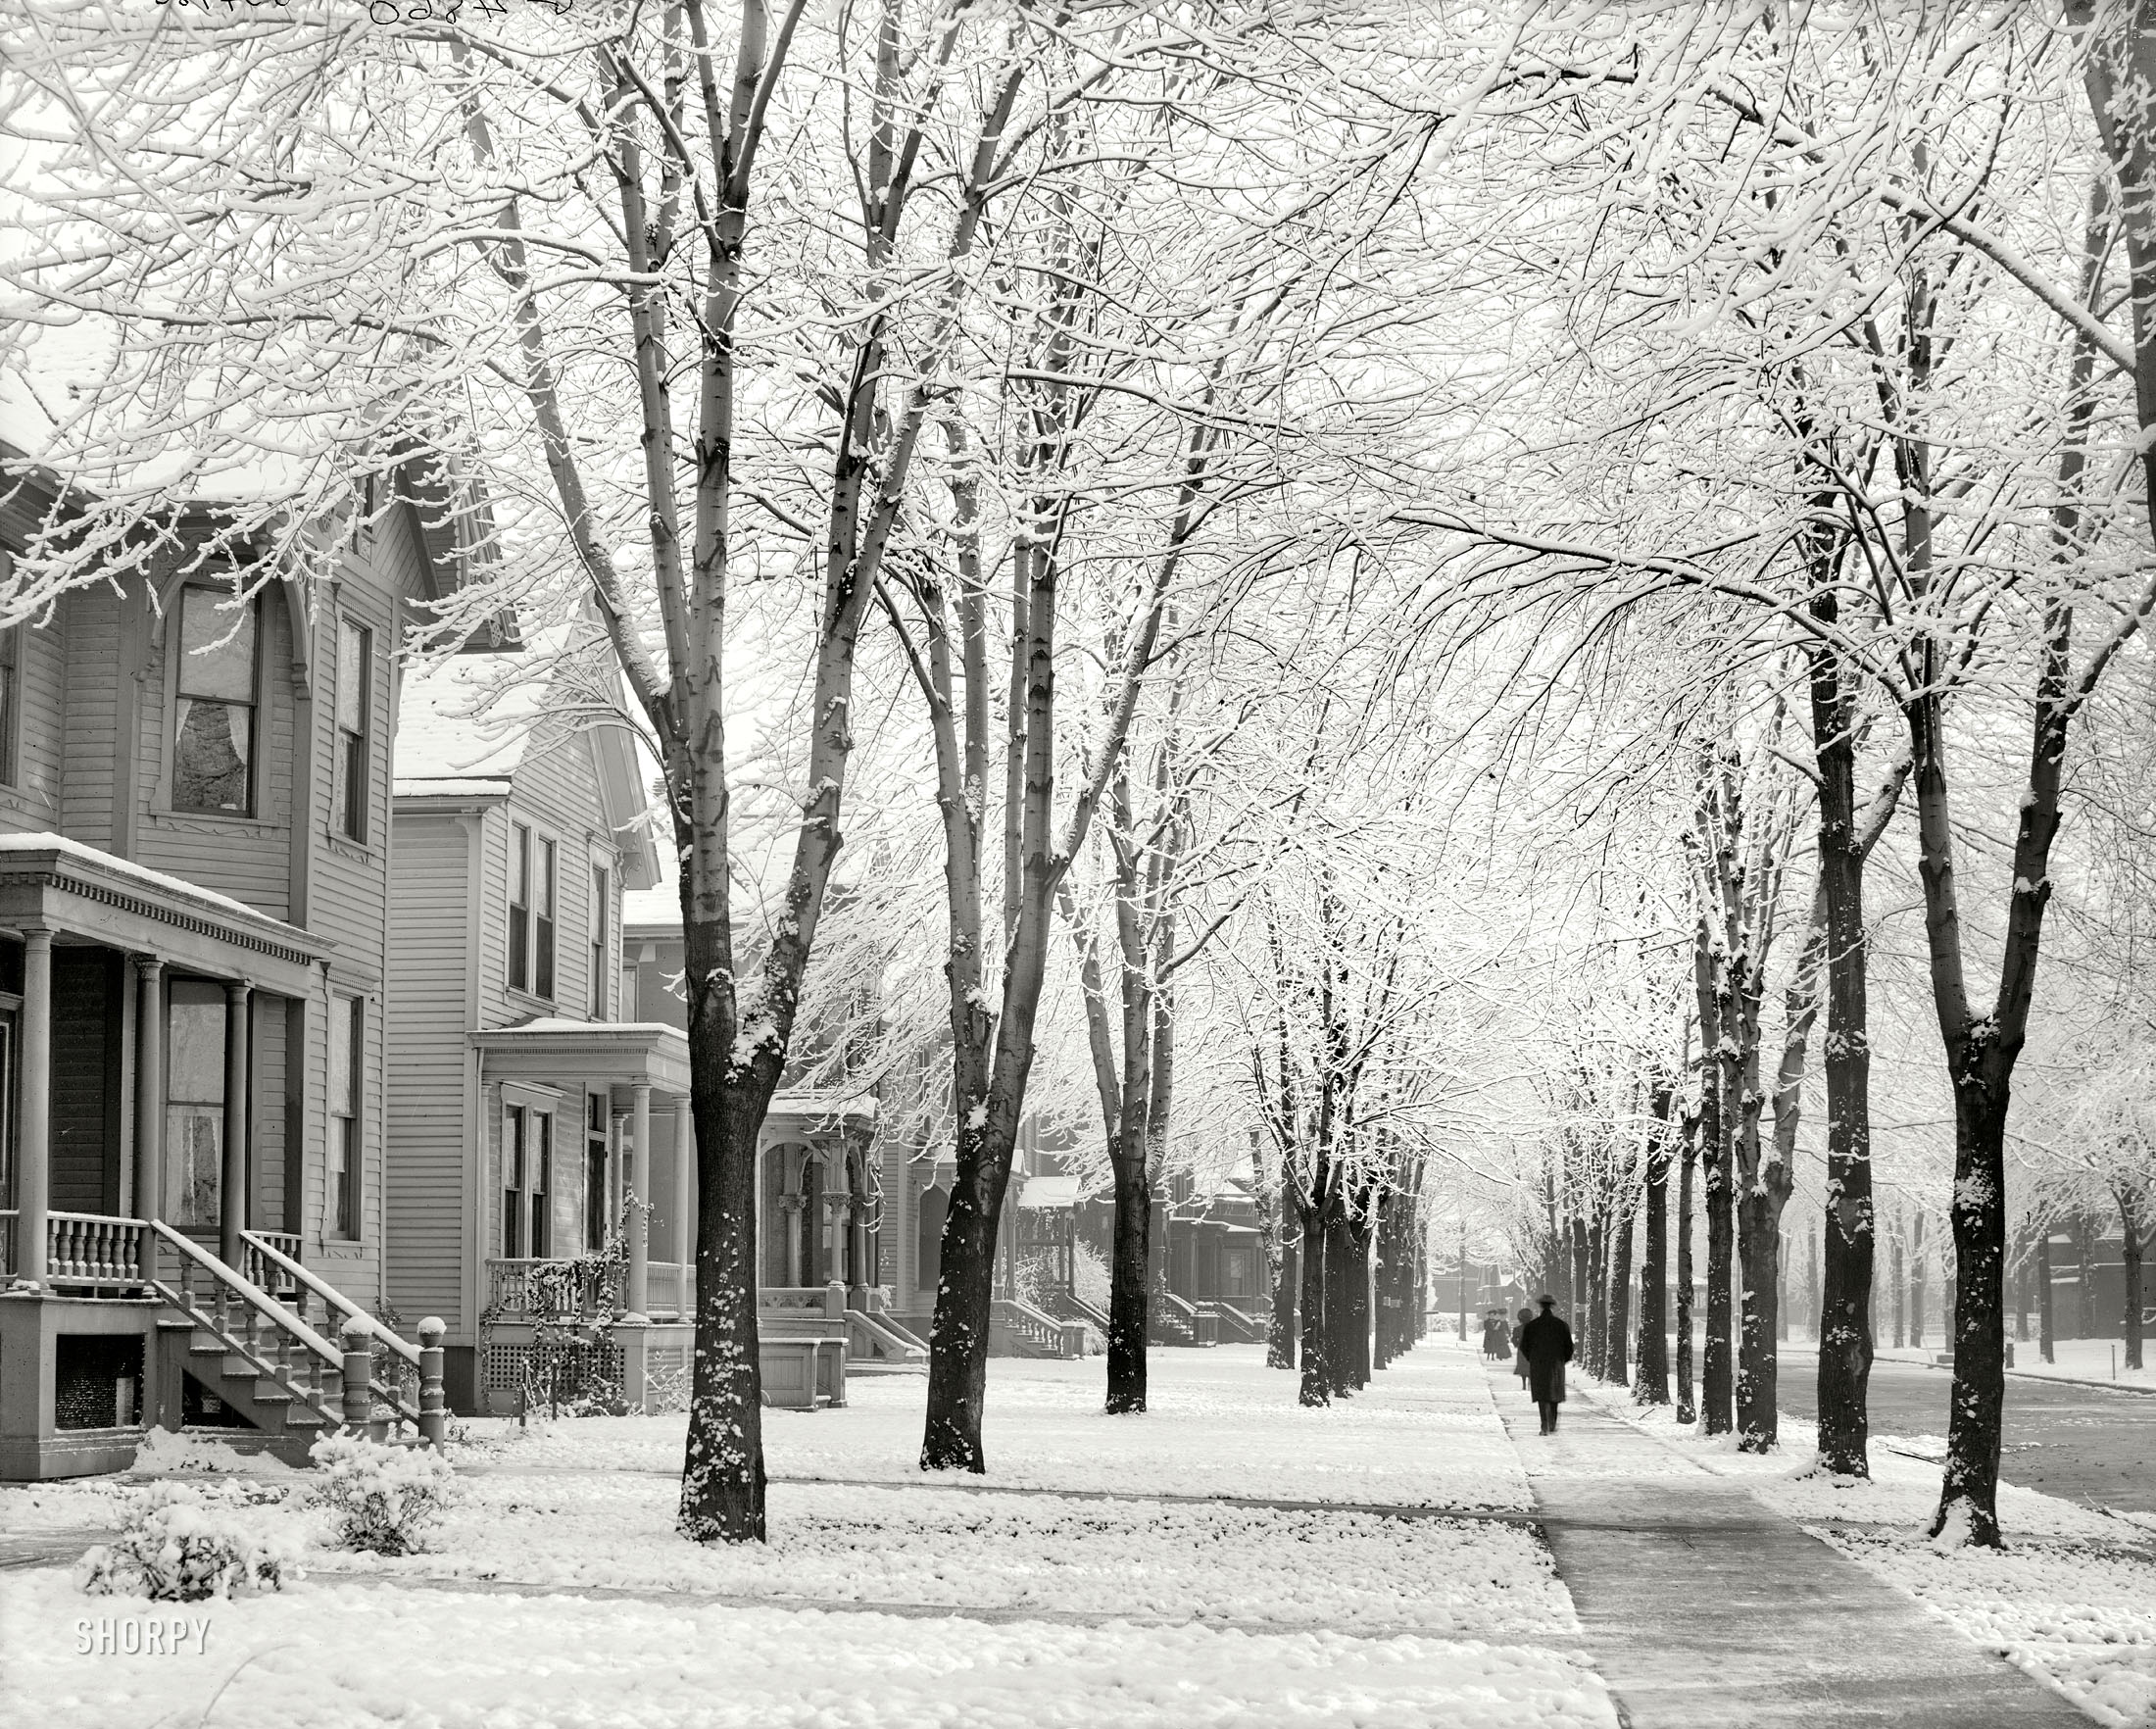 Circa 1905. "A winter morning (possibly Detroit, Michigan)." 8x10 inch dry plate glass negative, Detroit Publishing Company. View full size.